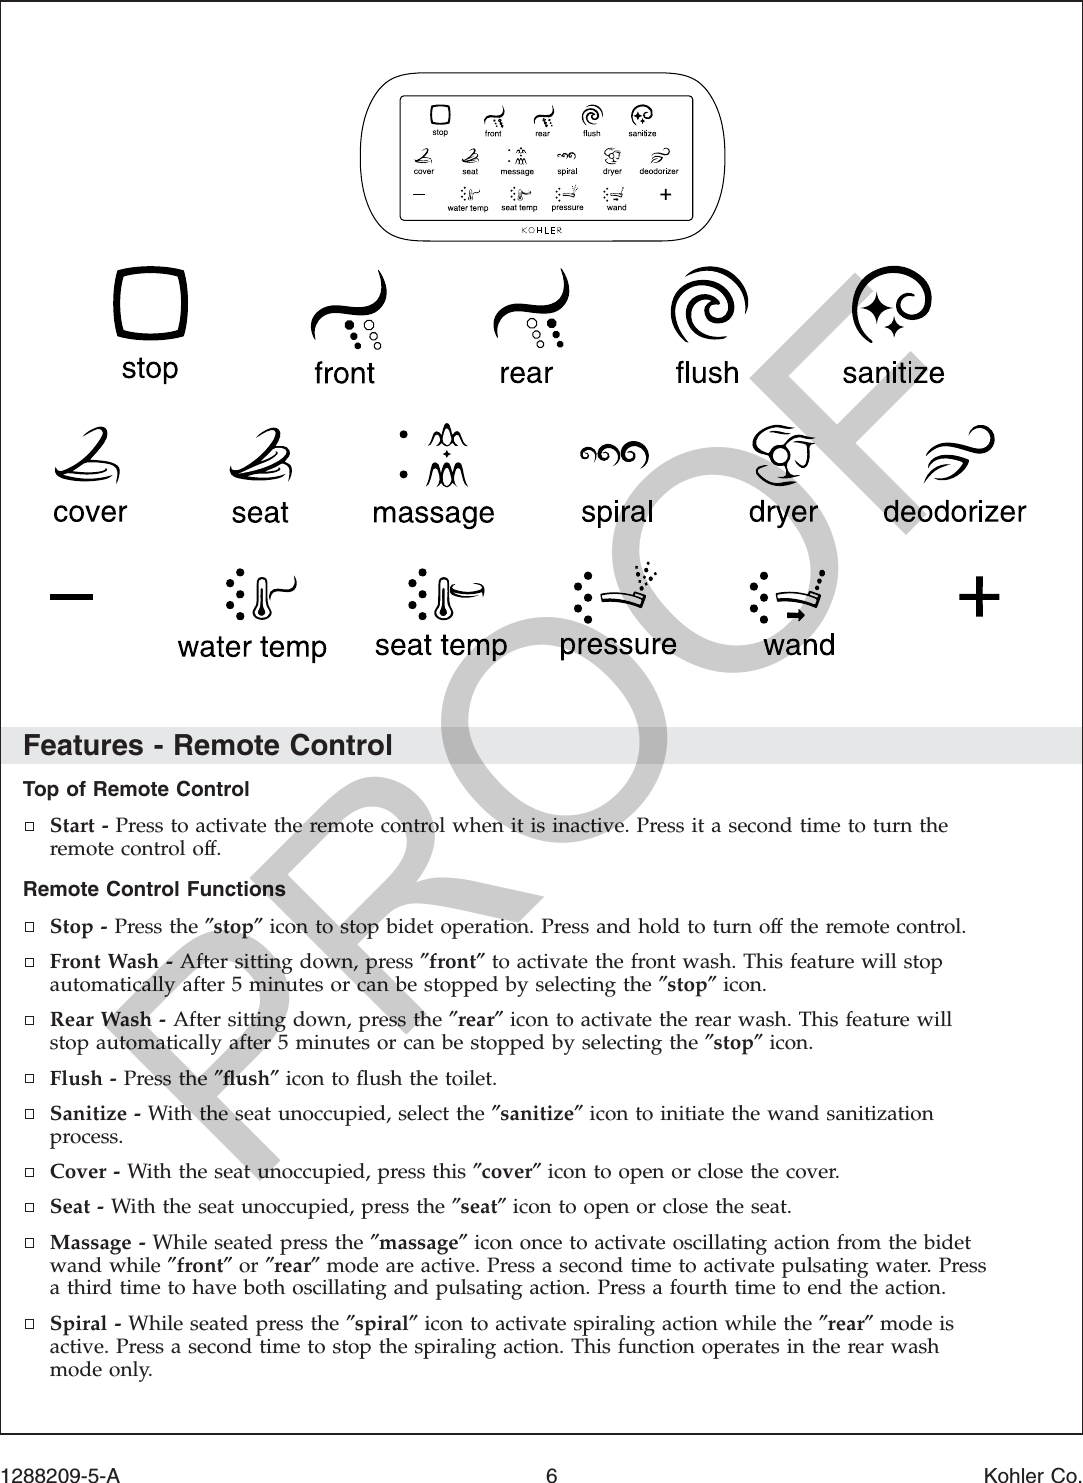 Features - Remote ControlTop of Remote ControlStart - Press to activate the remote control when it is inactive. Press it a second time to turn theremote control off.Remote Control FunctionsStop - Press the ″stop″icon to stop bidet operation. Press and hold to turn off the remote control.Front Wash - After sitting down, press ″front″to activate the front wash. This feature will stopautomatically after 5 minutes or can be stopped by selecting the ″stop″icon.Rear Wash - After sitting down, press the ″rear″icon to activate the rear wash. This feature willstop automatically after 5 minutes or can be stopped by selecting the ″stop″icon.Flush - Press the ″ﬂush″icon to ﬂush the toilet.Sanitize - With the seat unoccupied, select the ″sanitize″icon to initiate the wand sanitizationprocess.Cover - With the seat unoccupied, press this ″cover″icon to open or close the cover.Seat - With the seat unoccupied, press the ″seat″icon to open or close the seat.Massage - While seated press the ″massage″icon once to activate oscillating action from the bidetwand while ″front″or ″rear″mode are active. Press a second time to activate pulsating water. Pressa third time to have both oscillating and pulsating action. Press a fourth time to end the action.Spiral - While seated press the ″spiral″icon to activate spiraling action while the ″rear″mode isactive. Press a second time to stop the spiraling action. This function operates in the rear washmode only.1288209-5-A 6 Kohler Co.PROOF